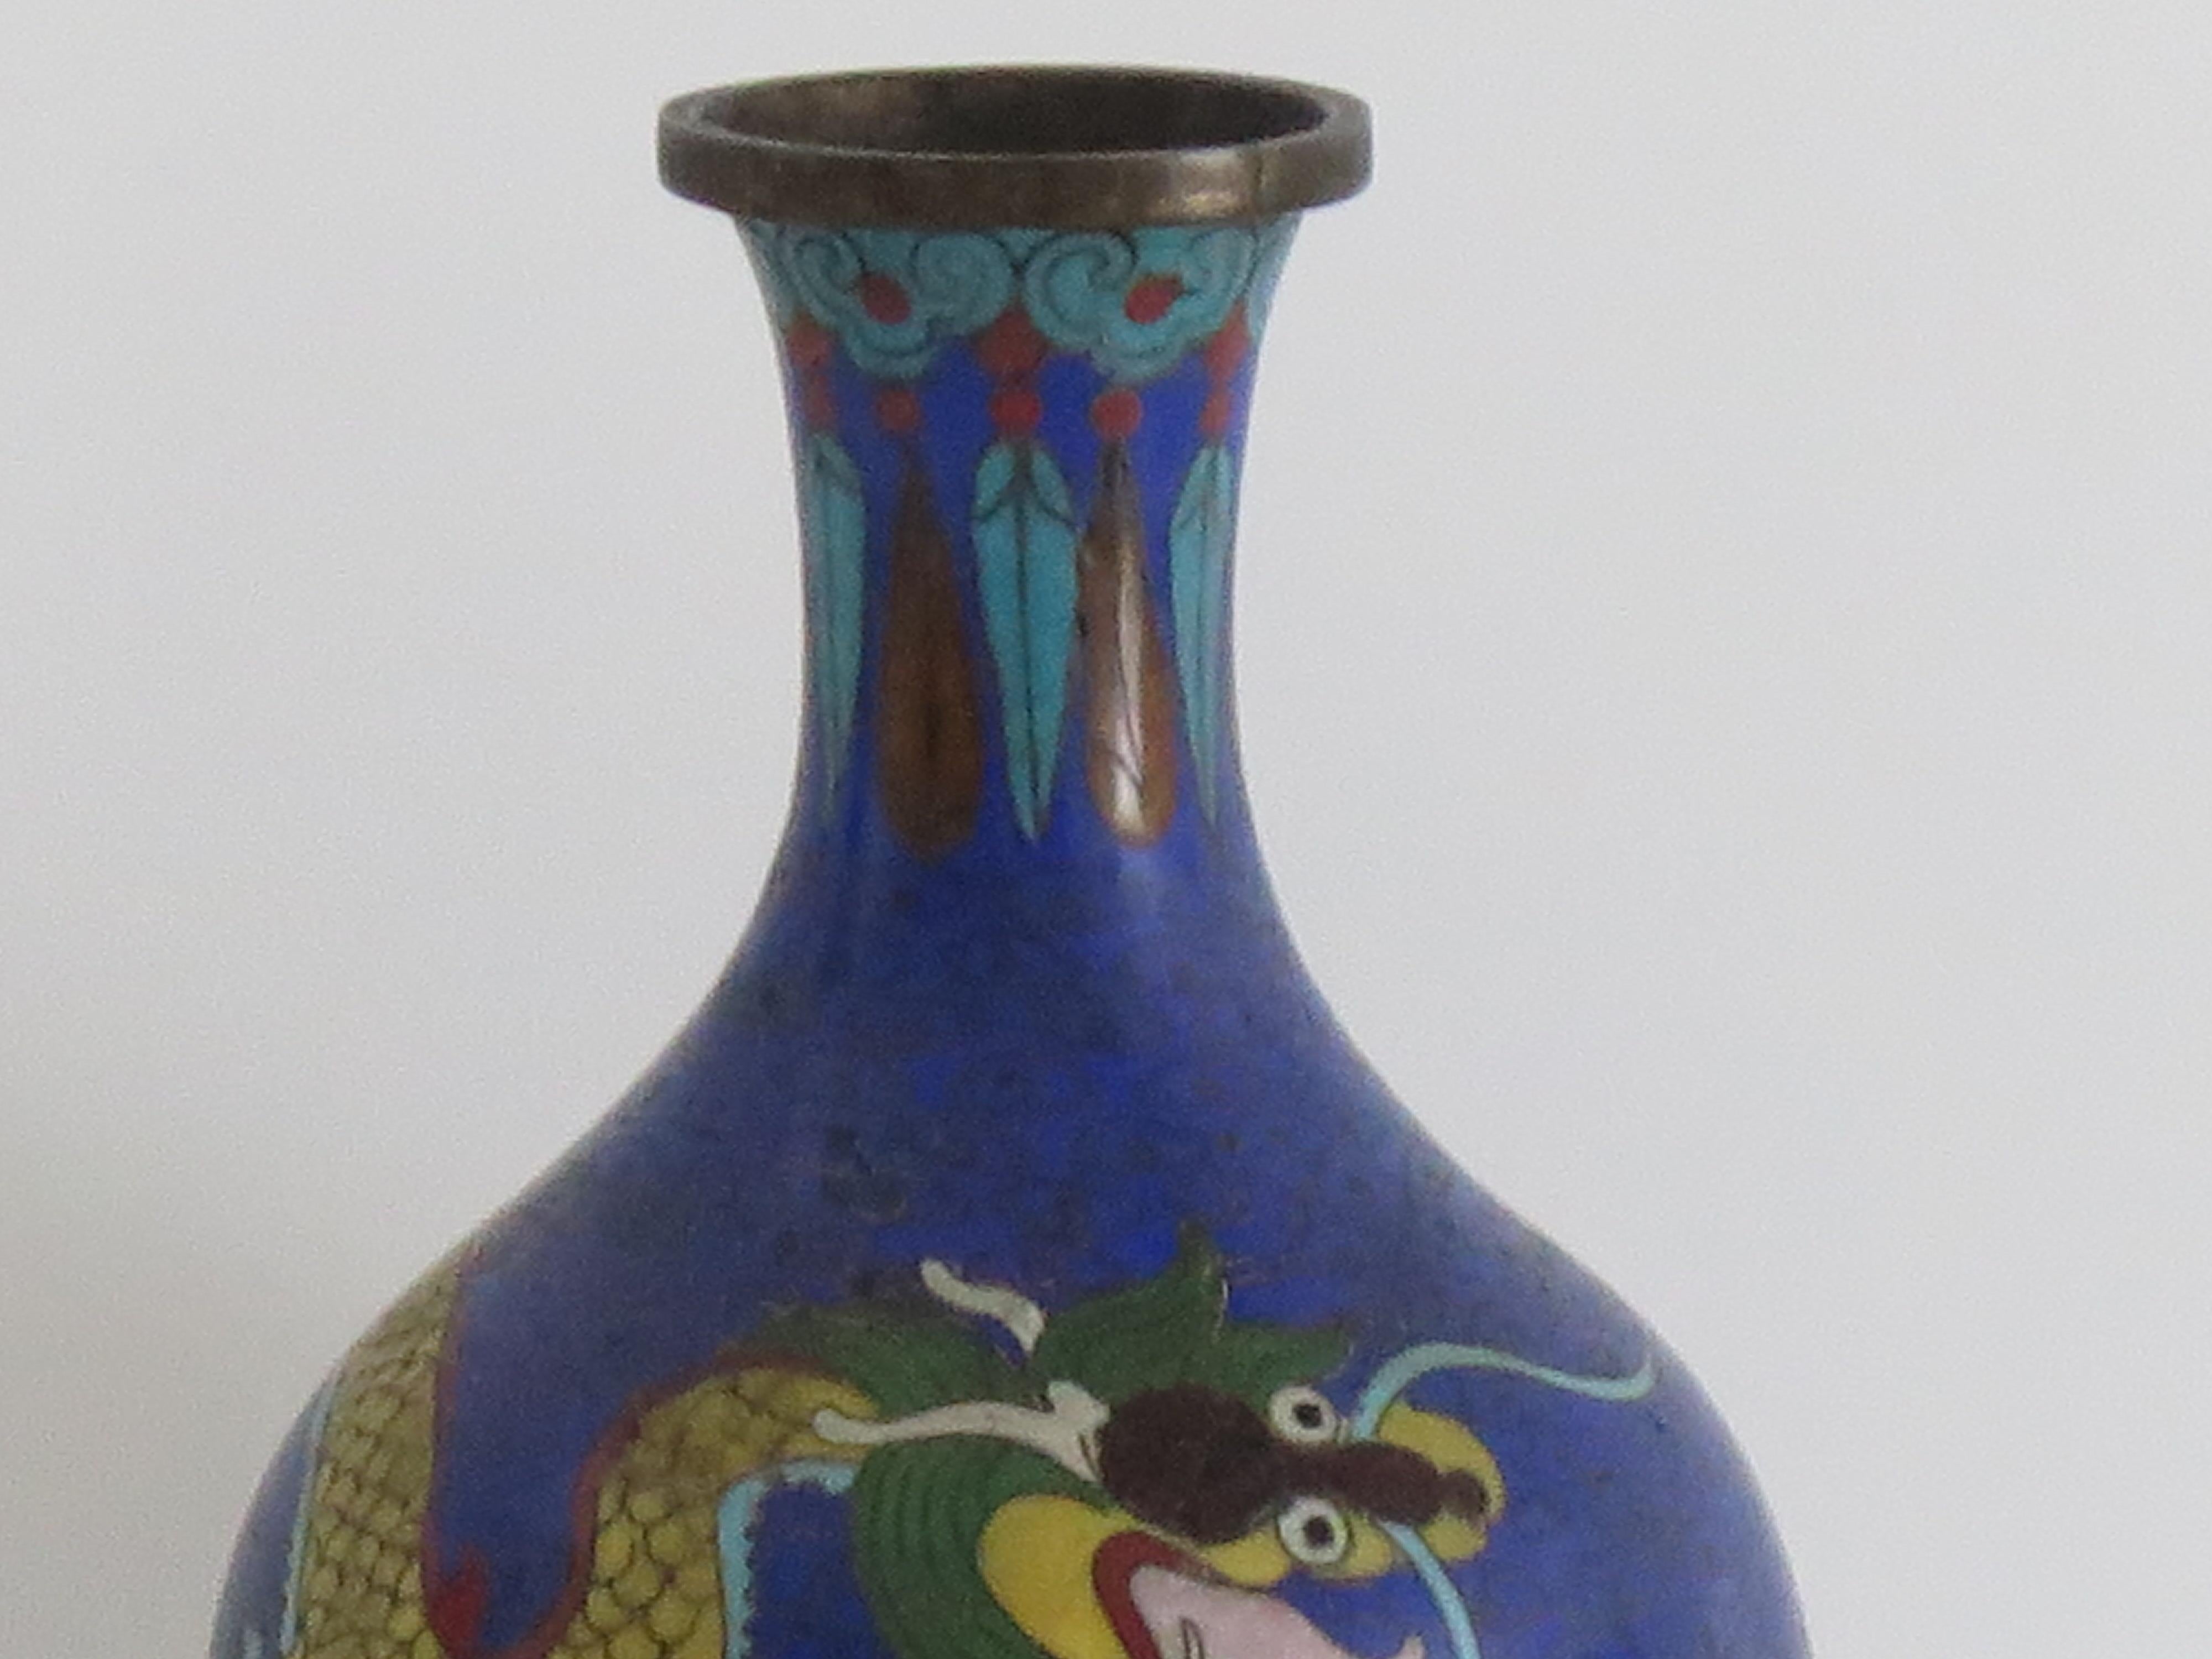 Cloissoné 19th Century Chinese Cloisonné Vase with Dragon chasing pearl, Qing Period For Sale